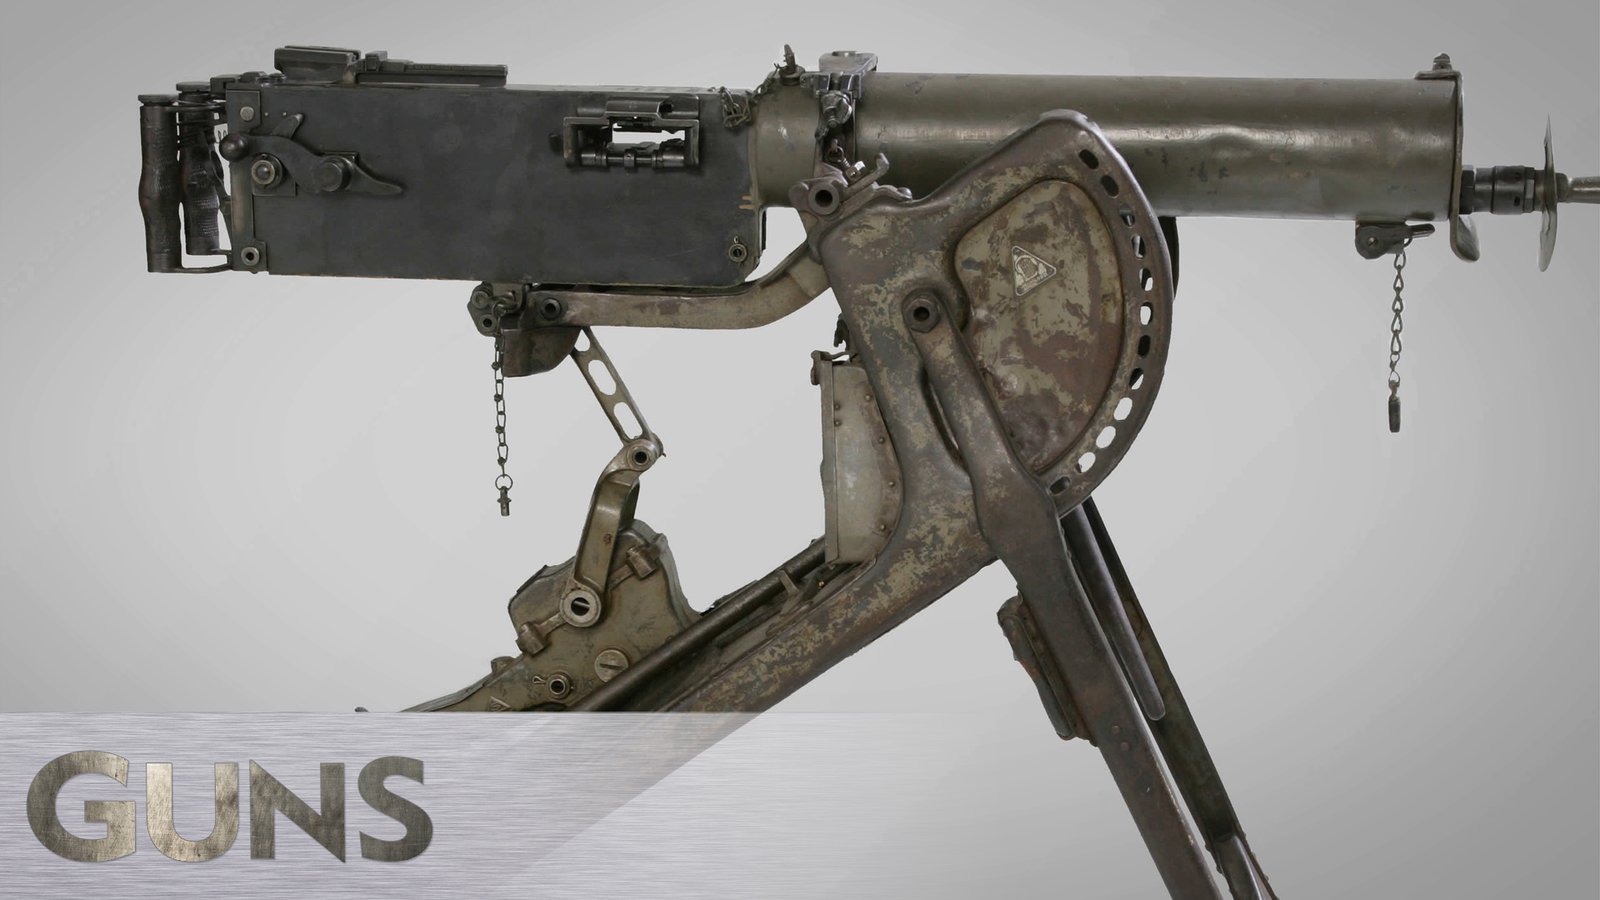 The Weapons of World War I